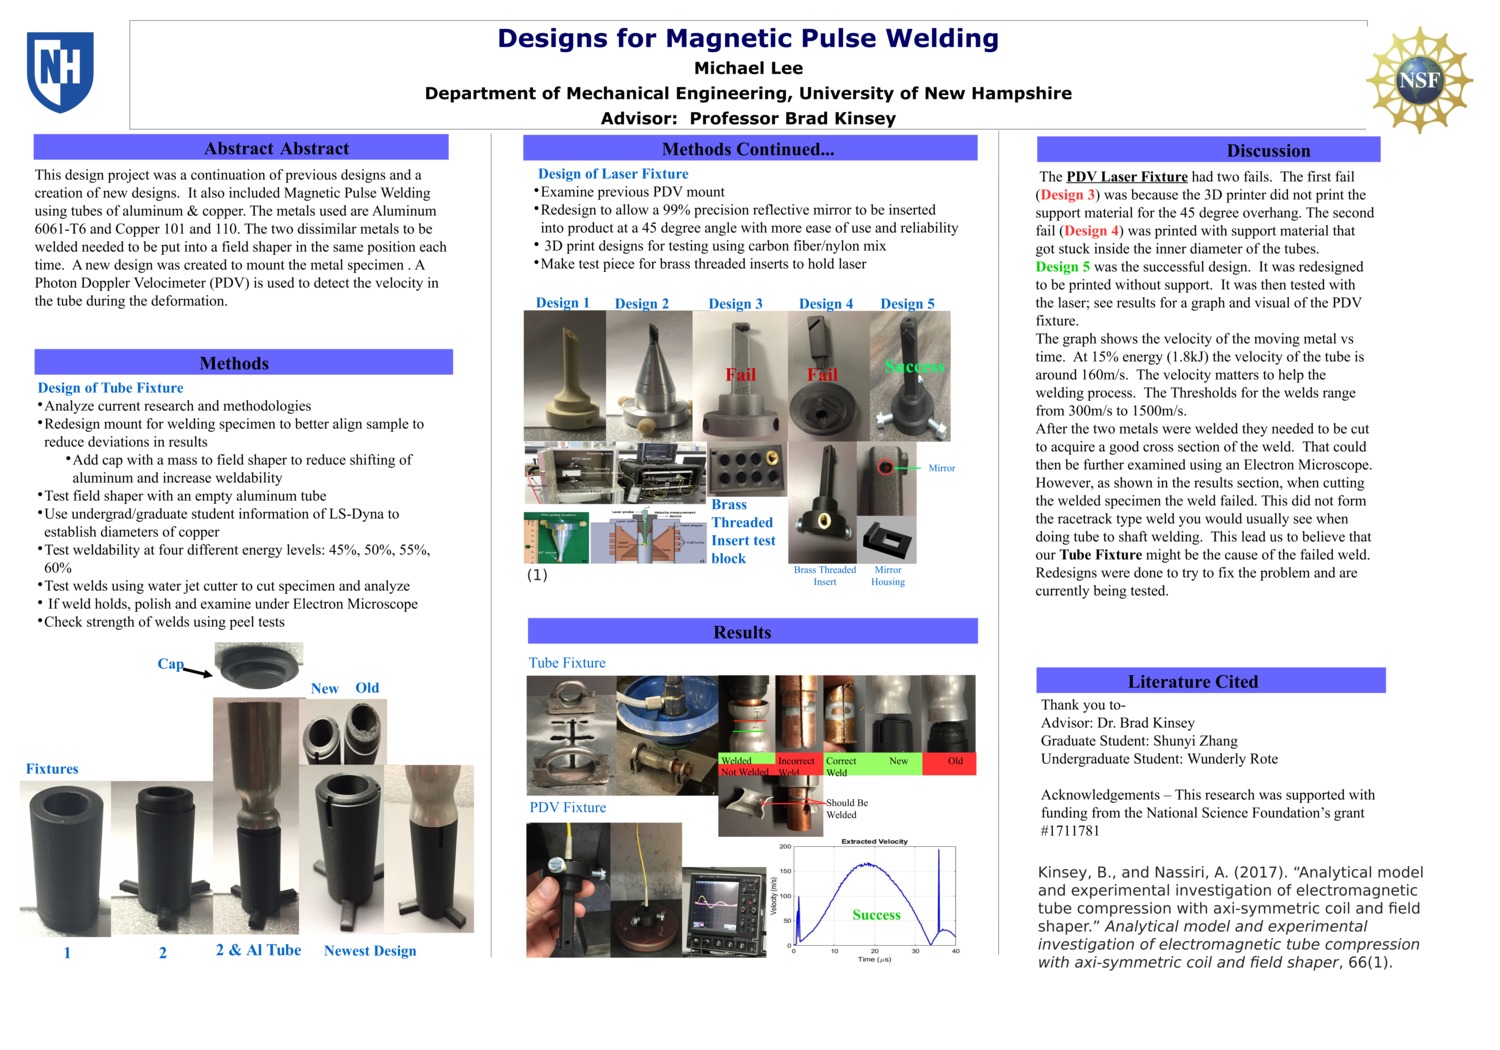 Designs For Magnetic Pulse Welding by wr1001